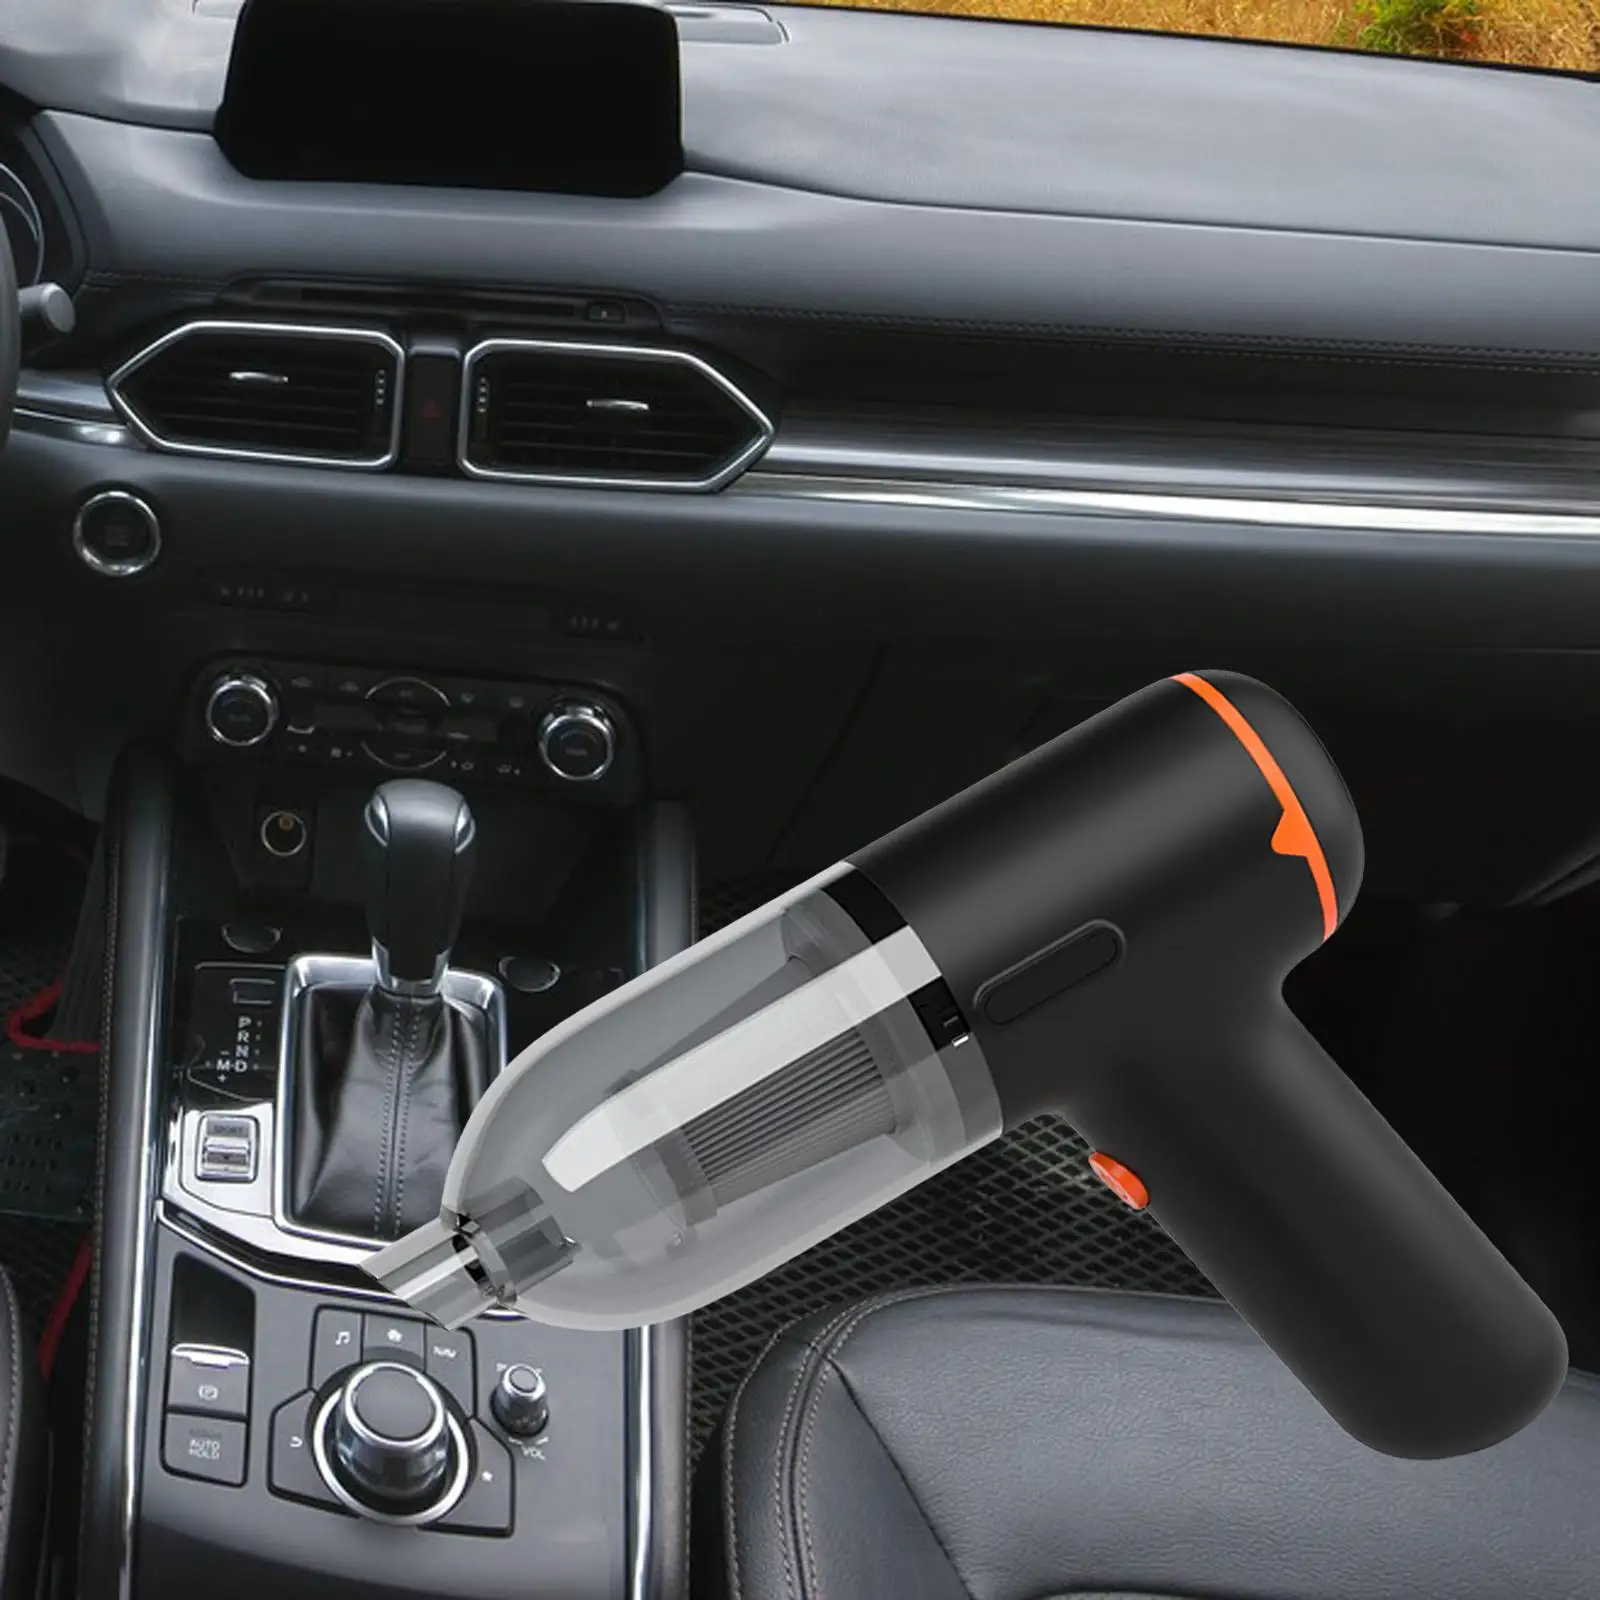 Handheld Mini Car Vacuum Duster with Nozzles USB Rechargeable Strong Suction for Car Carpet Desktop Sofa